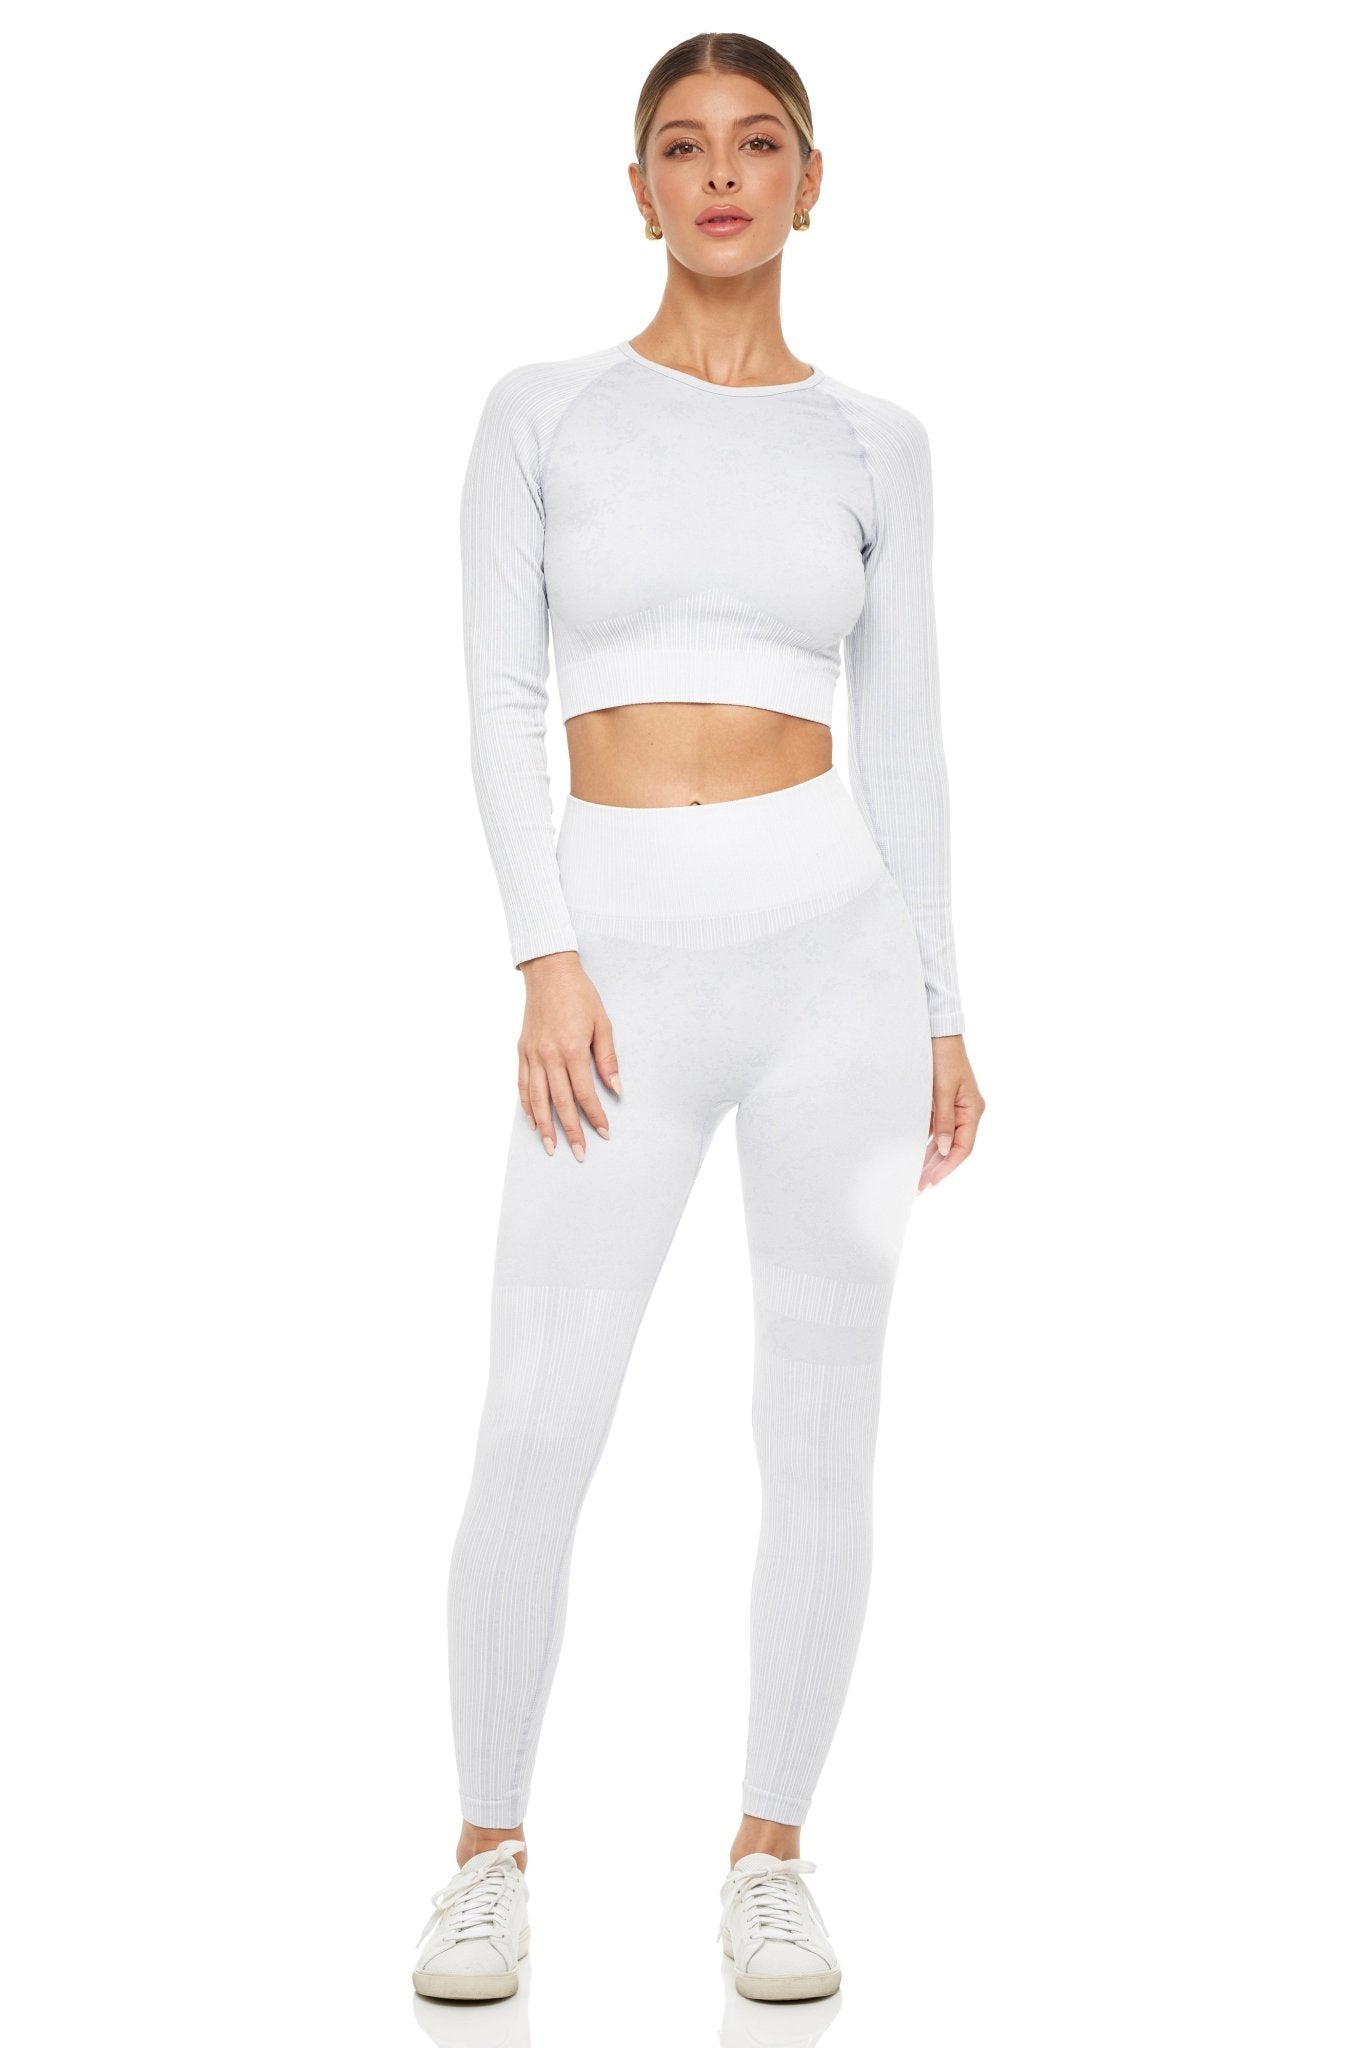 Tines Two Piece Yoga Set - YG COLLECTION